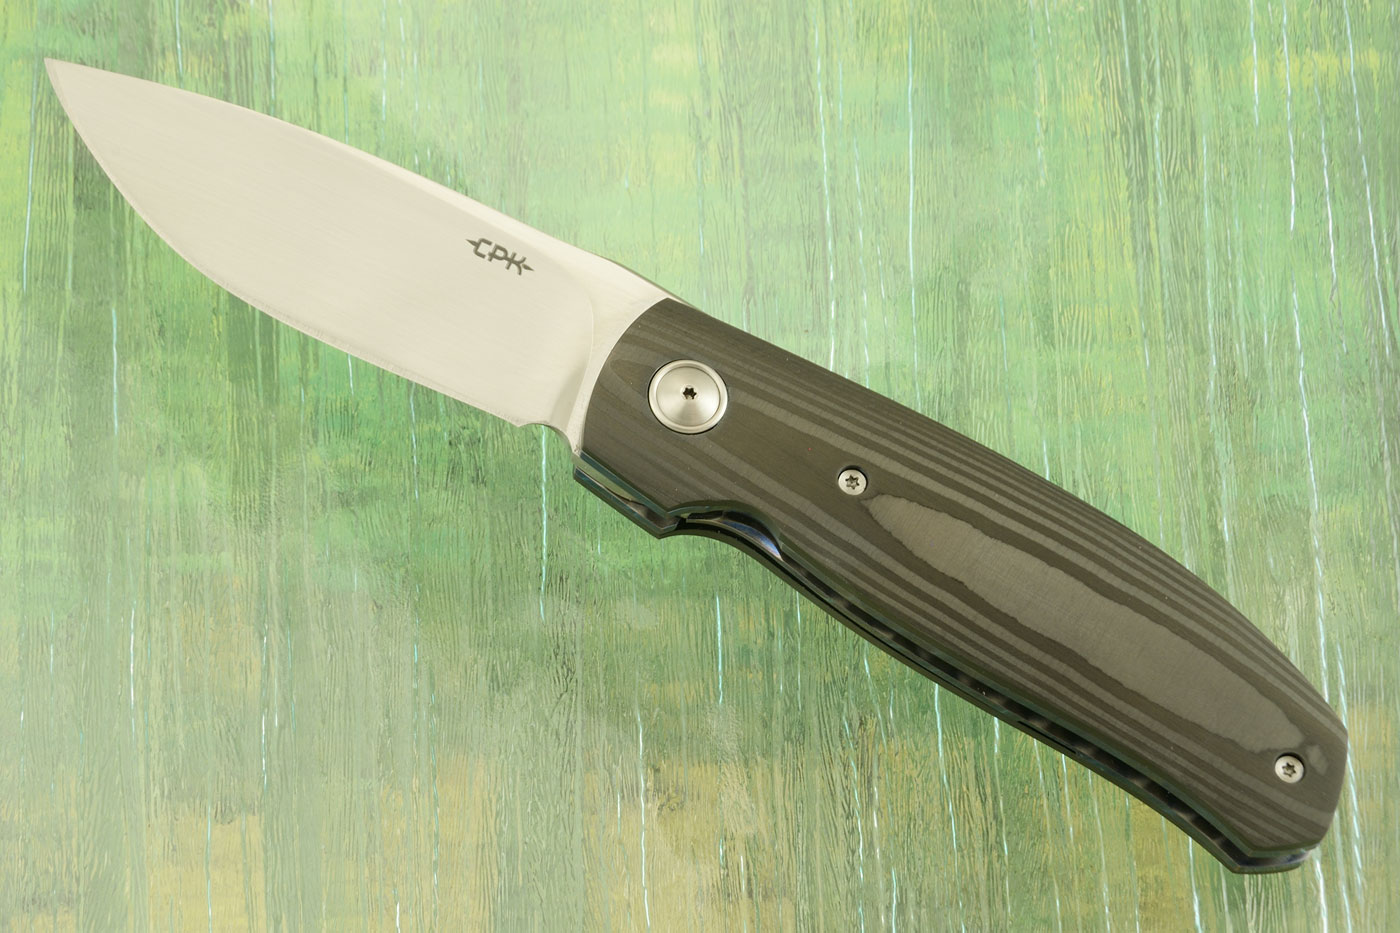 CPK1 Front Flipper with Unidirectional Carbon Fiber - M390